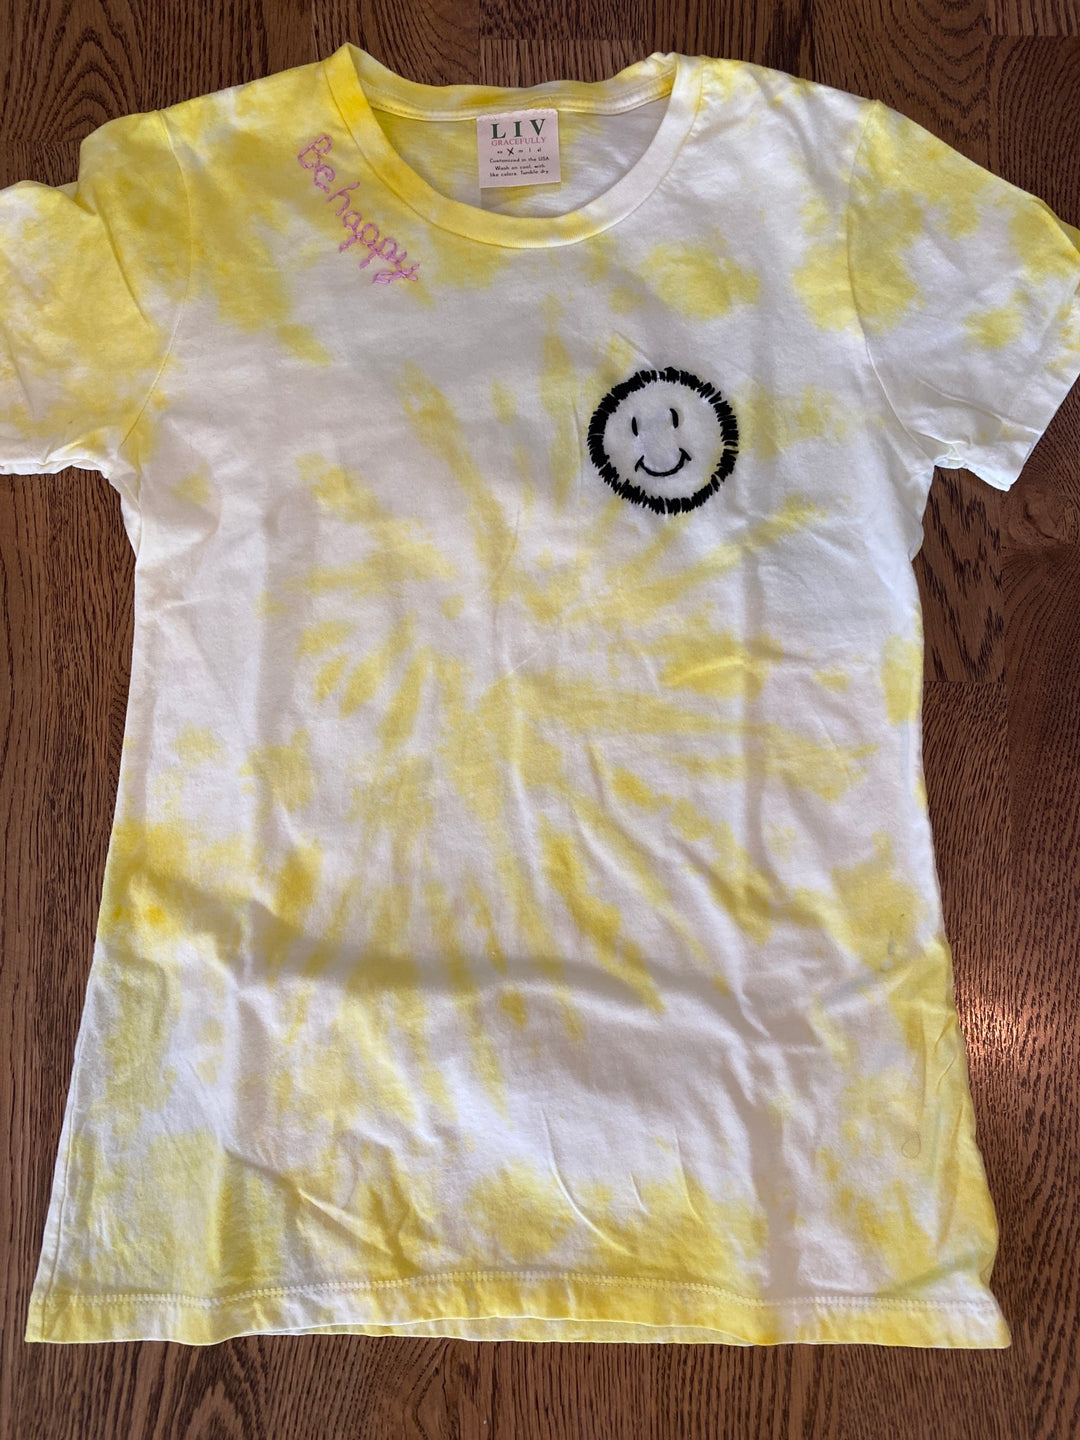 YELLOW TIE DYE TEE/HAPPY FACE - Kingfisher Road - Online Boutique